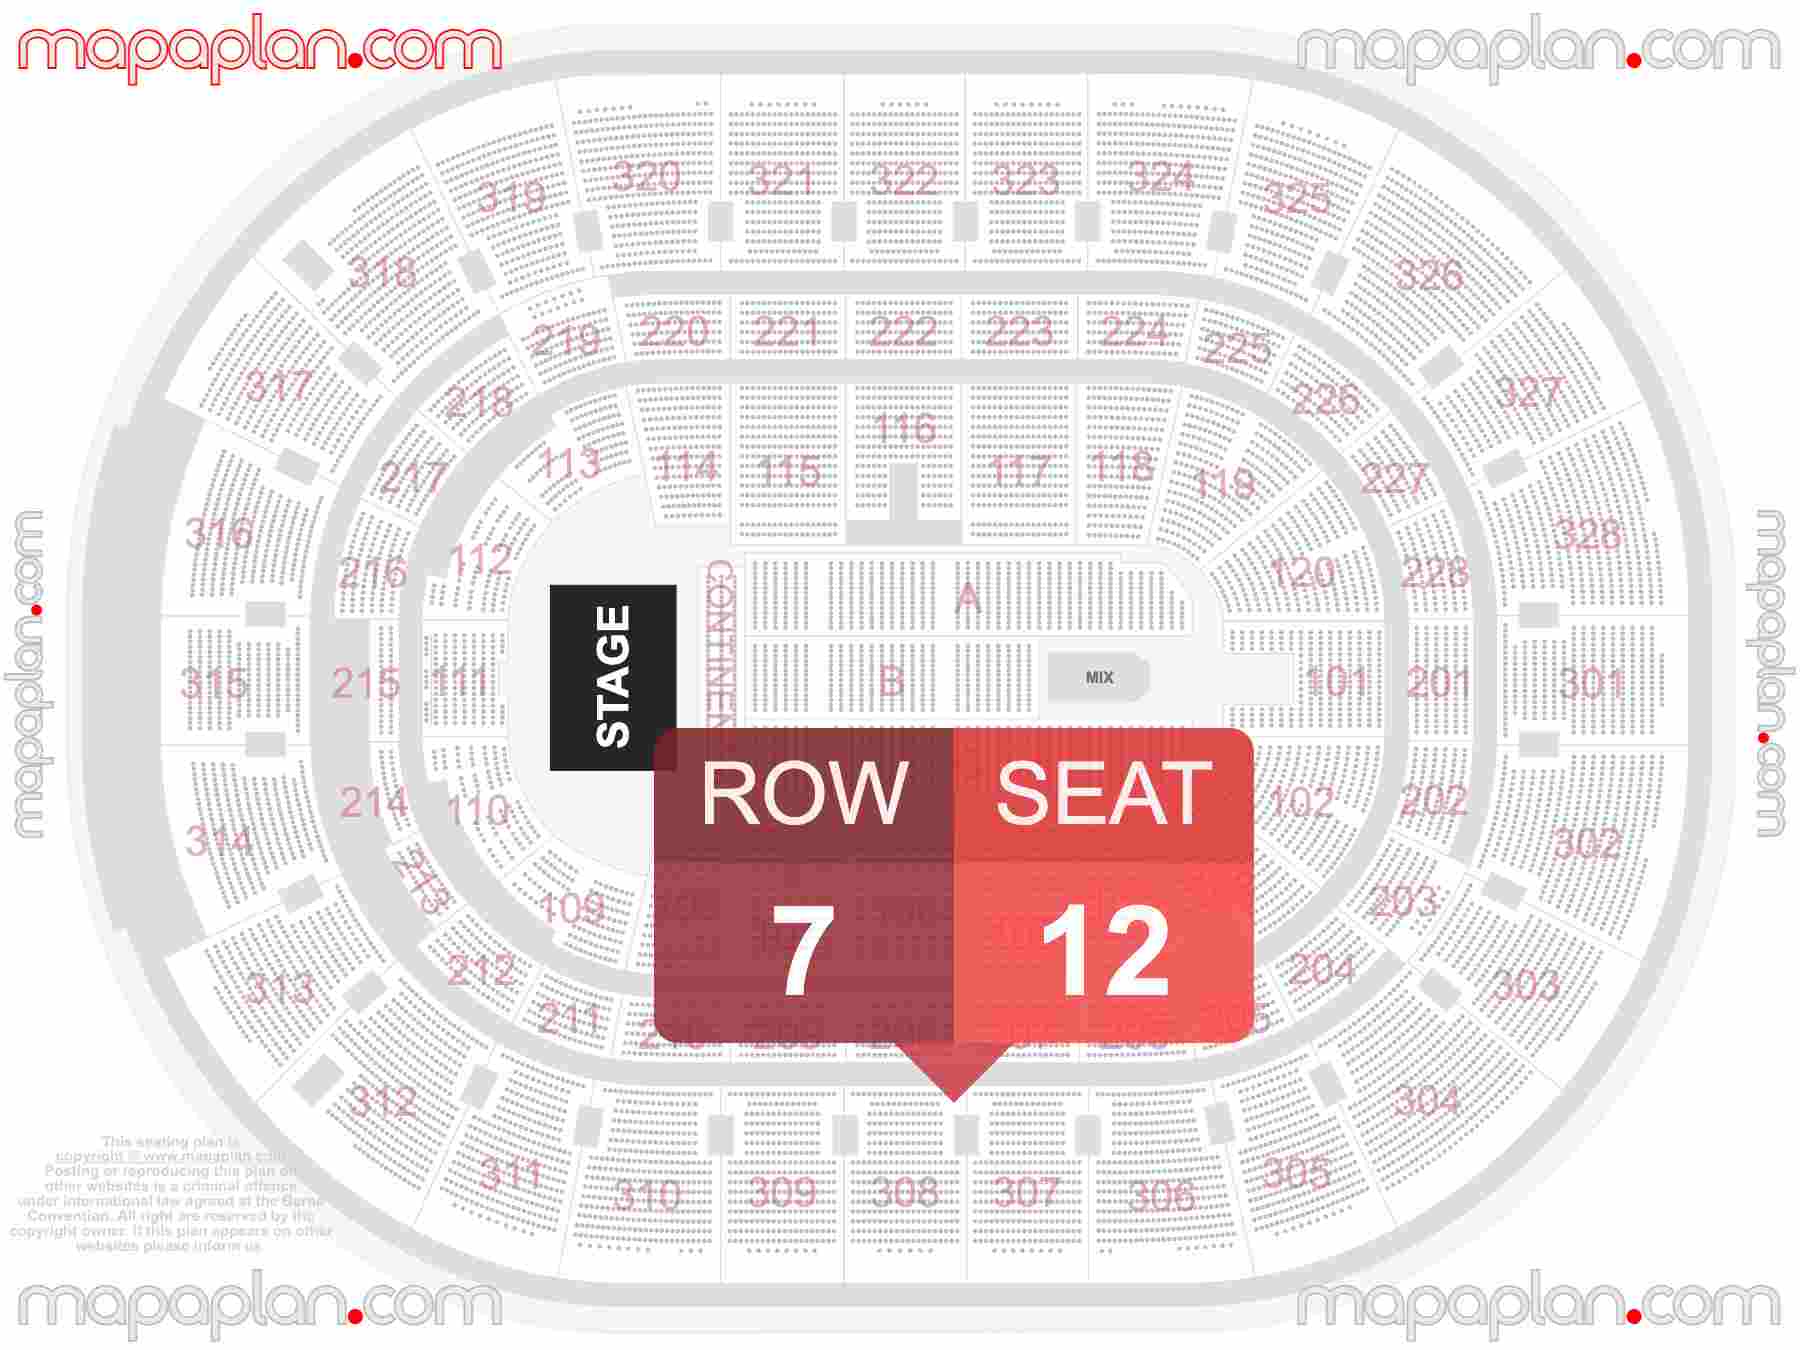 Ottawa Canadian Tire Centre seating map Concert detailed seat numbers and row numbering map with interactive map chart layout